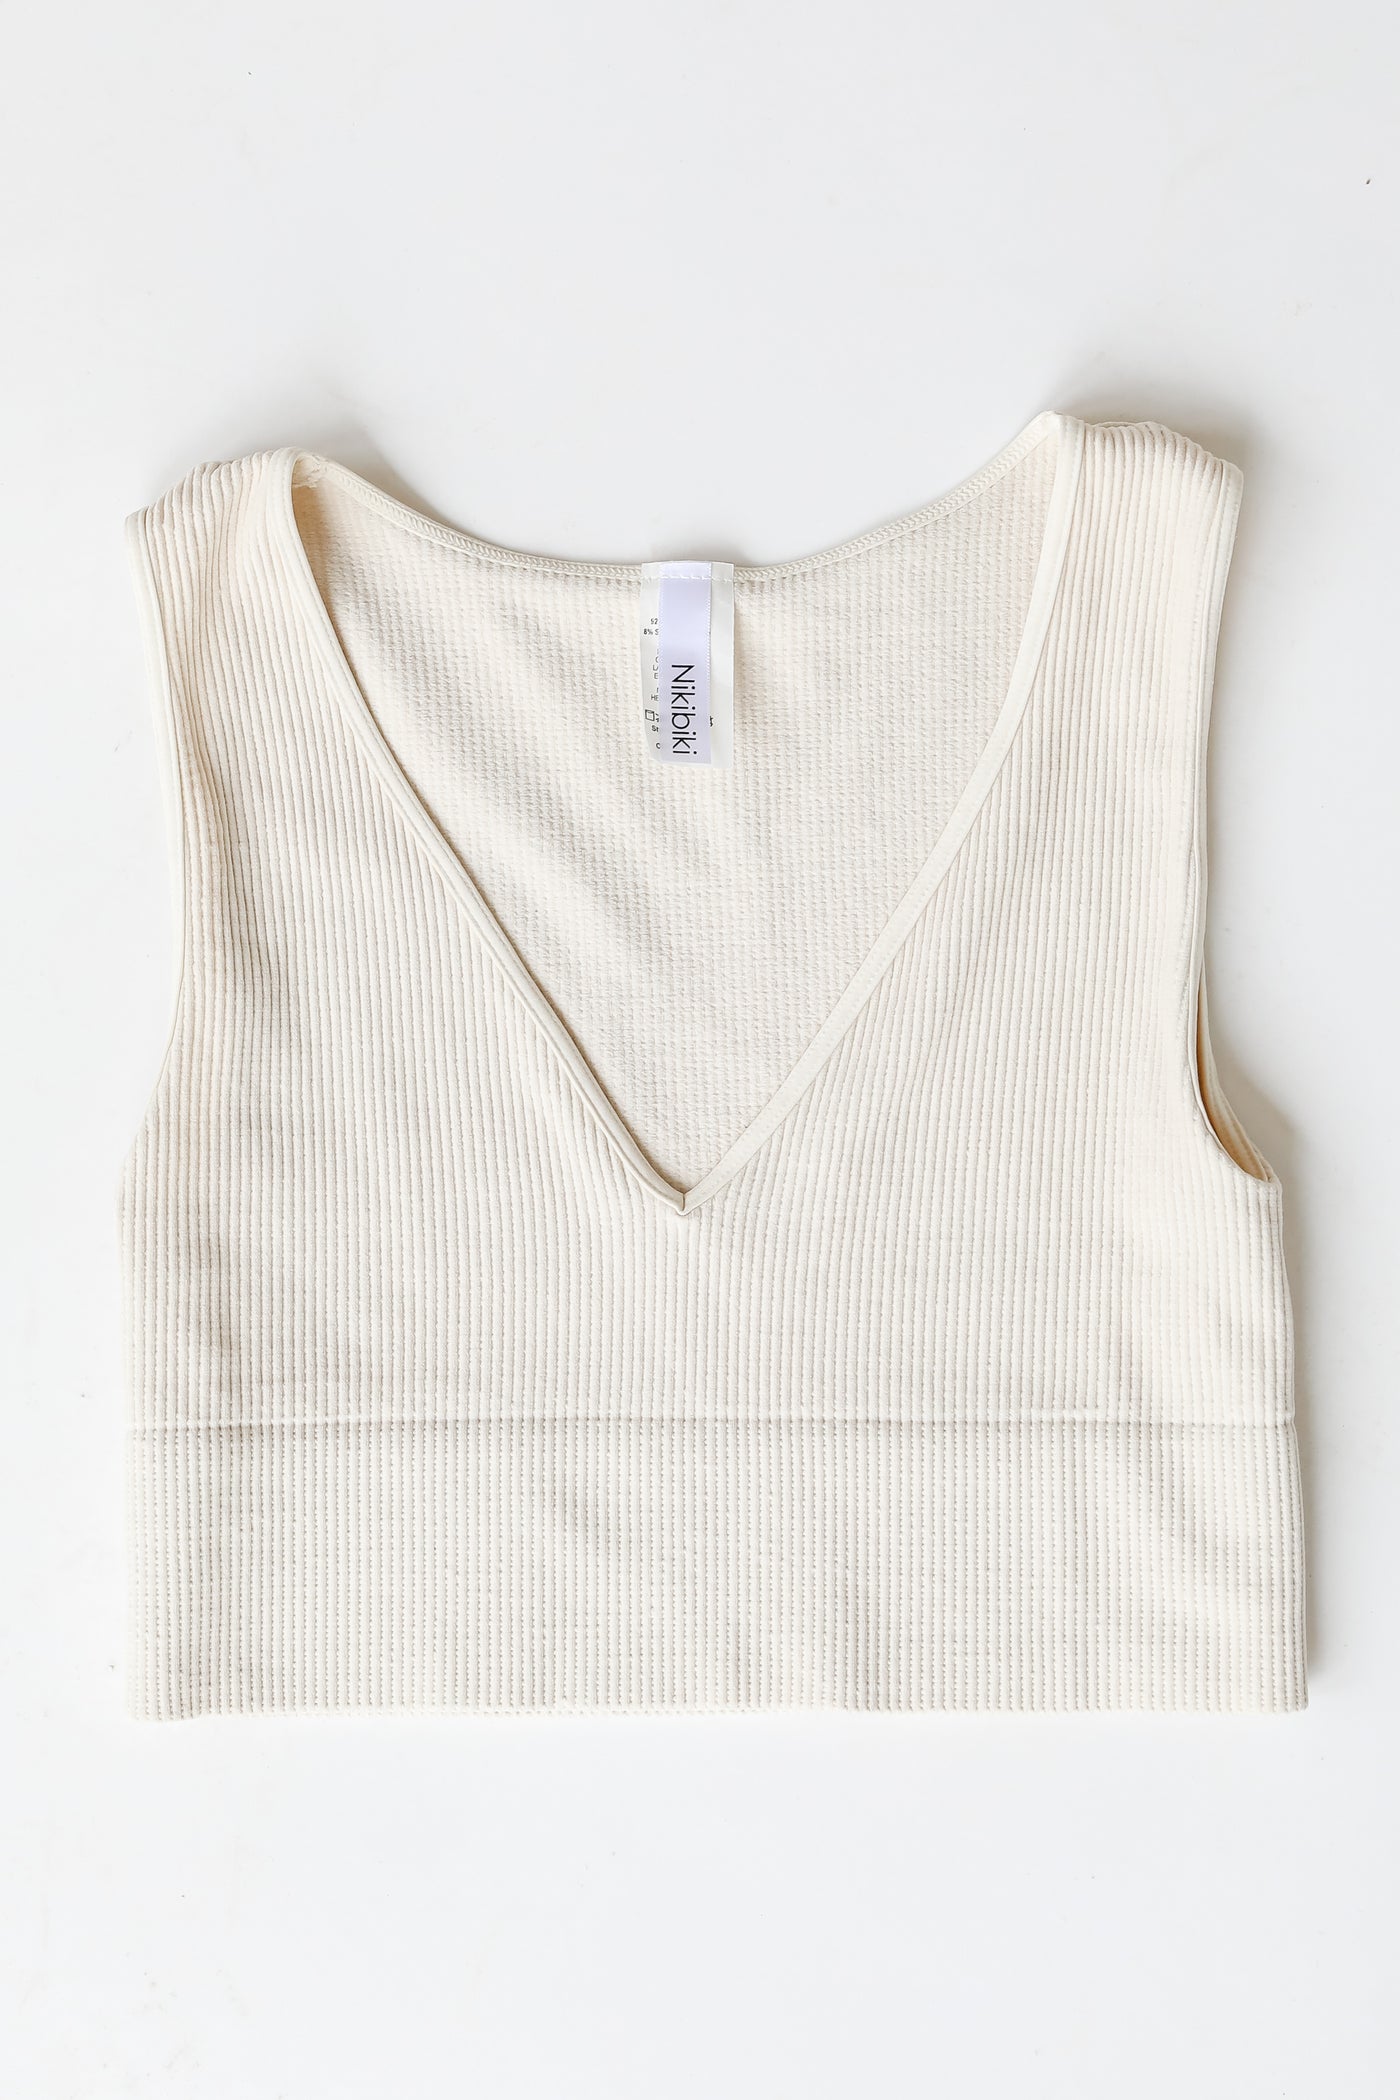 V-Neck Ribbed Cropped Tank in ivory flat lay